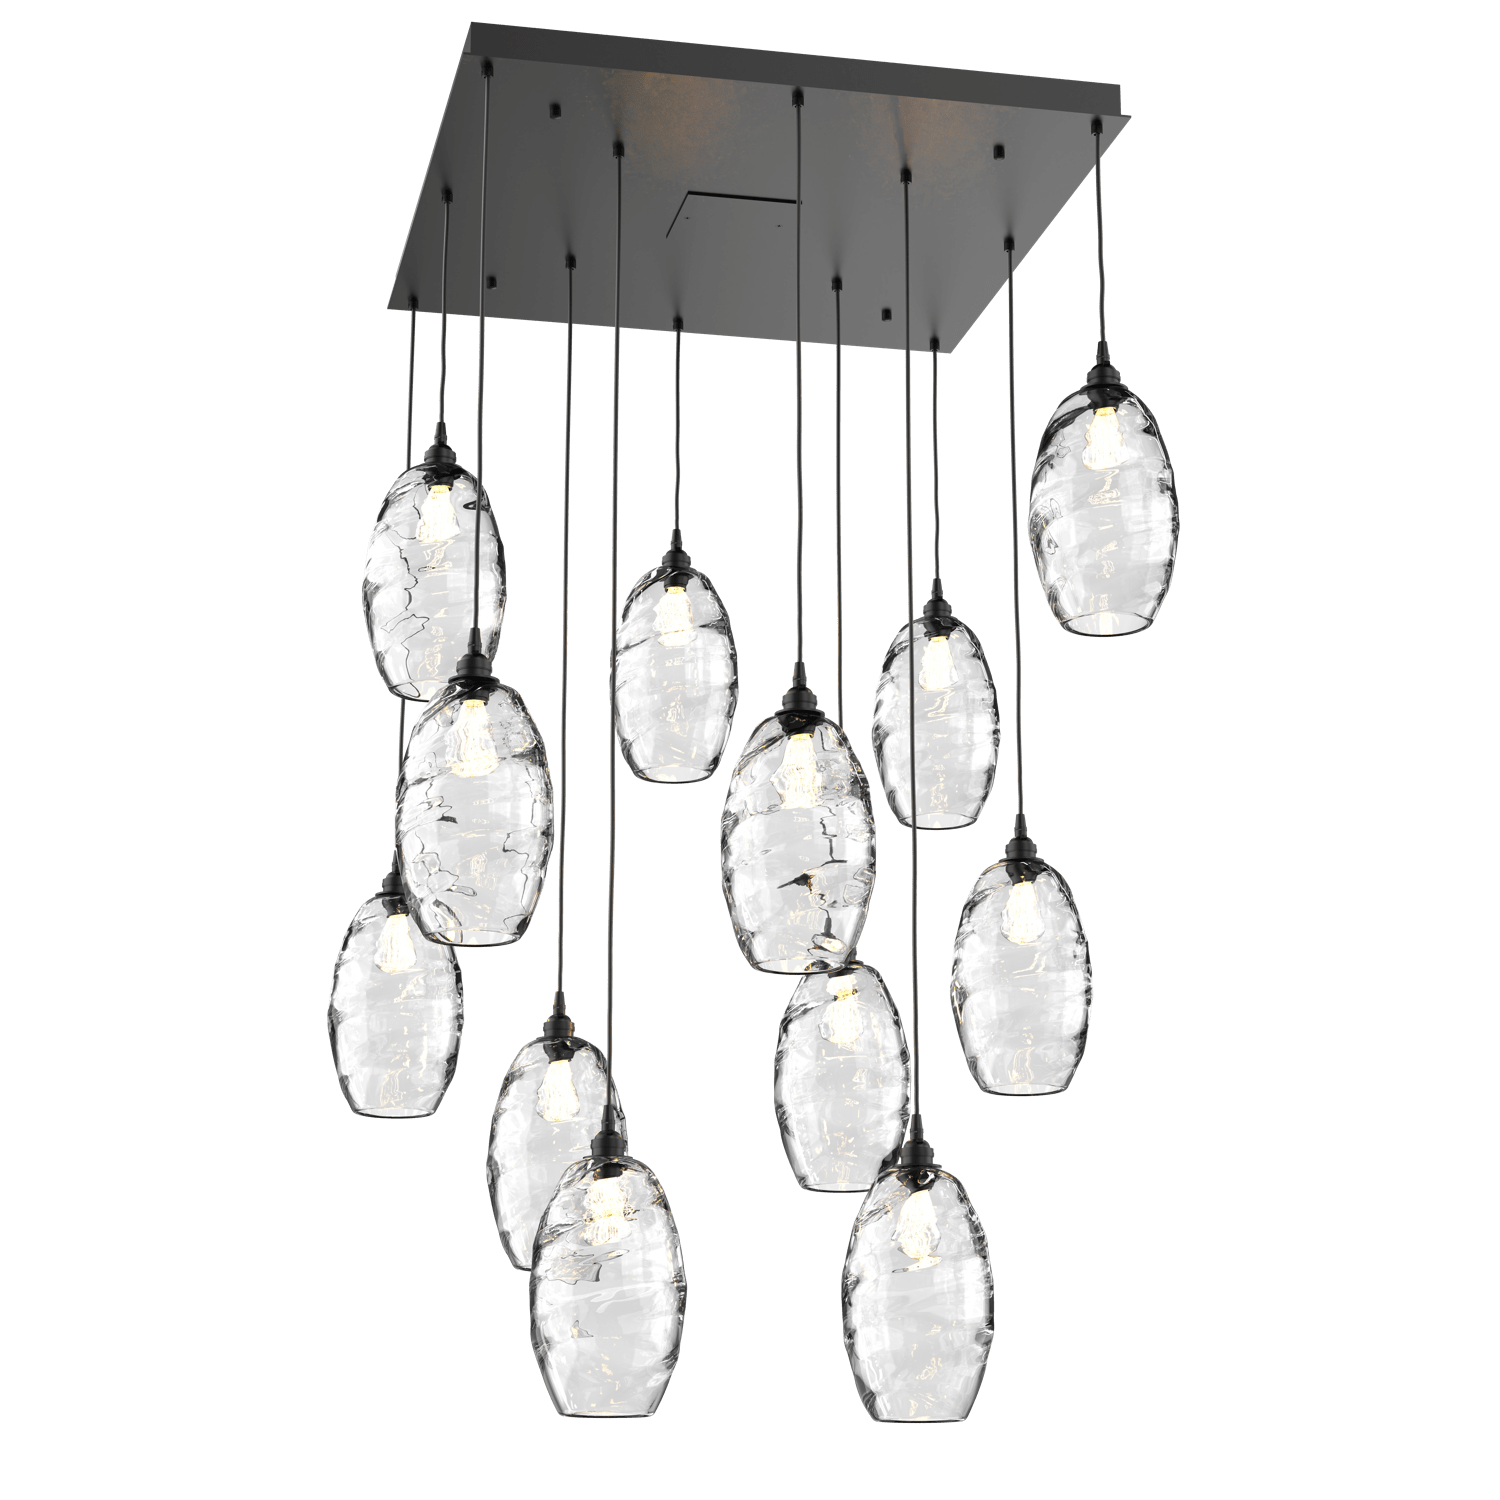 CHB0035-12-MB-OC-Hammerton-Studio-Optic-Blown-Glass-Elisse-12-light-square-pendant-chandelier-with-matte-black-finish-and-optic-clear-blown-glass-shades-and-incandescent-lamping